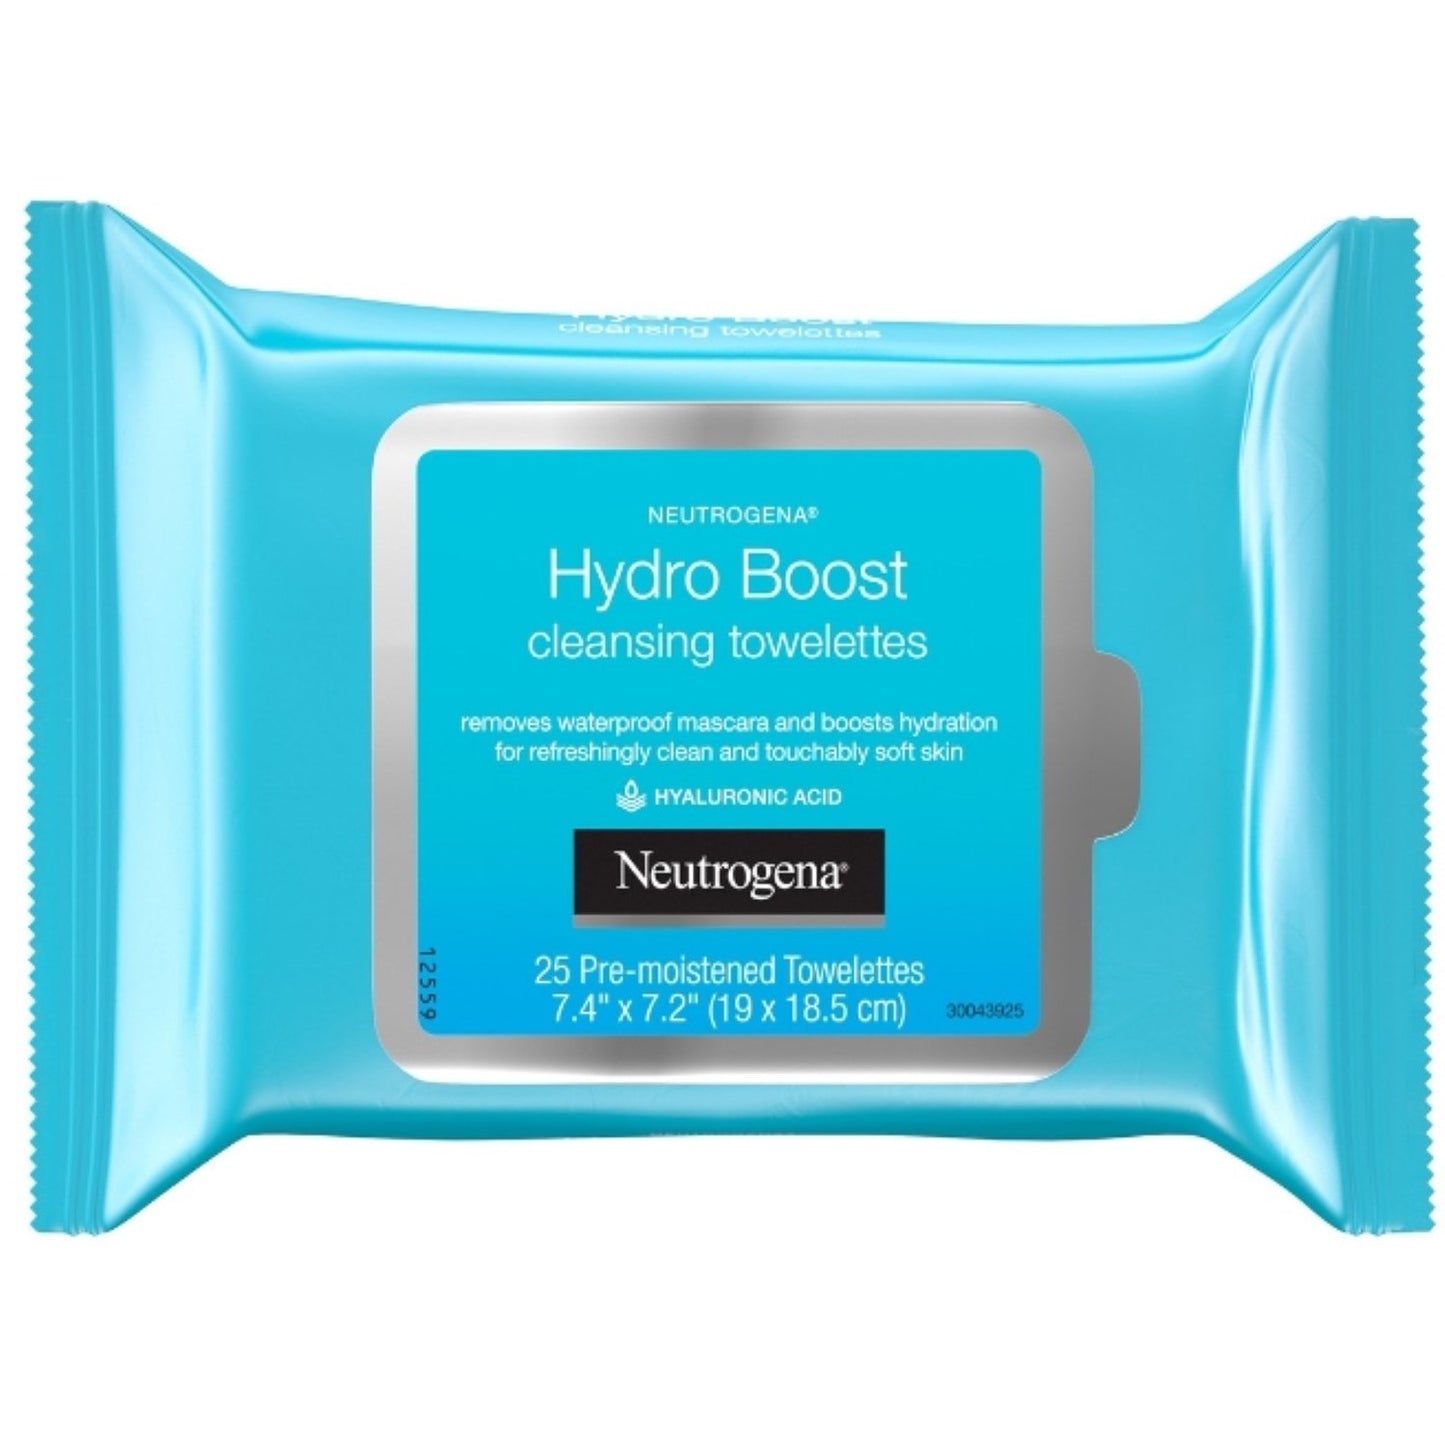 Neutrogena Hydro Boost Cleanser Facial Wipes 25 Count